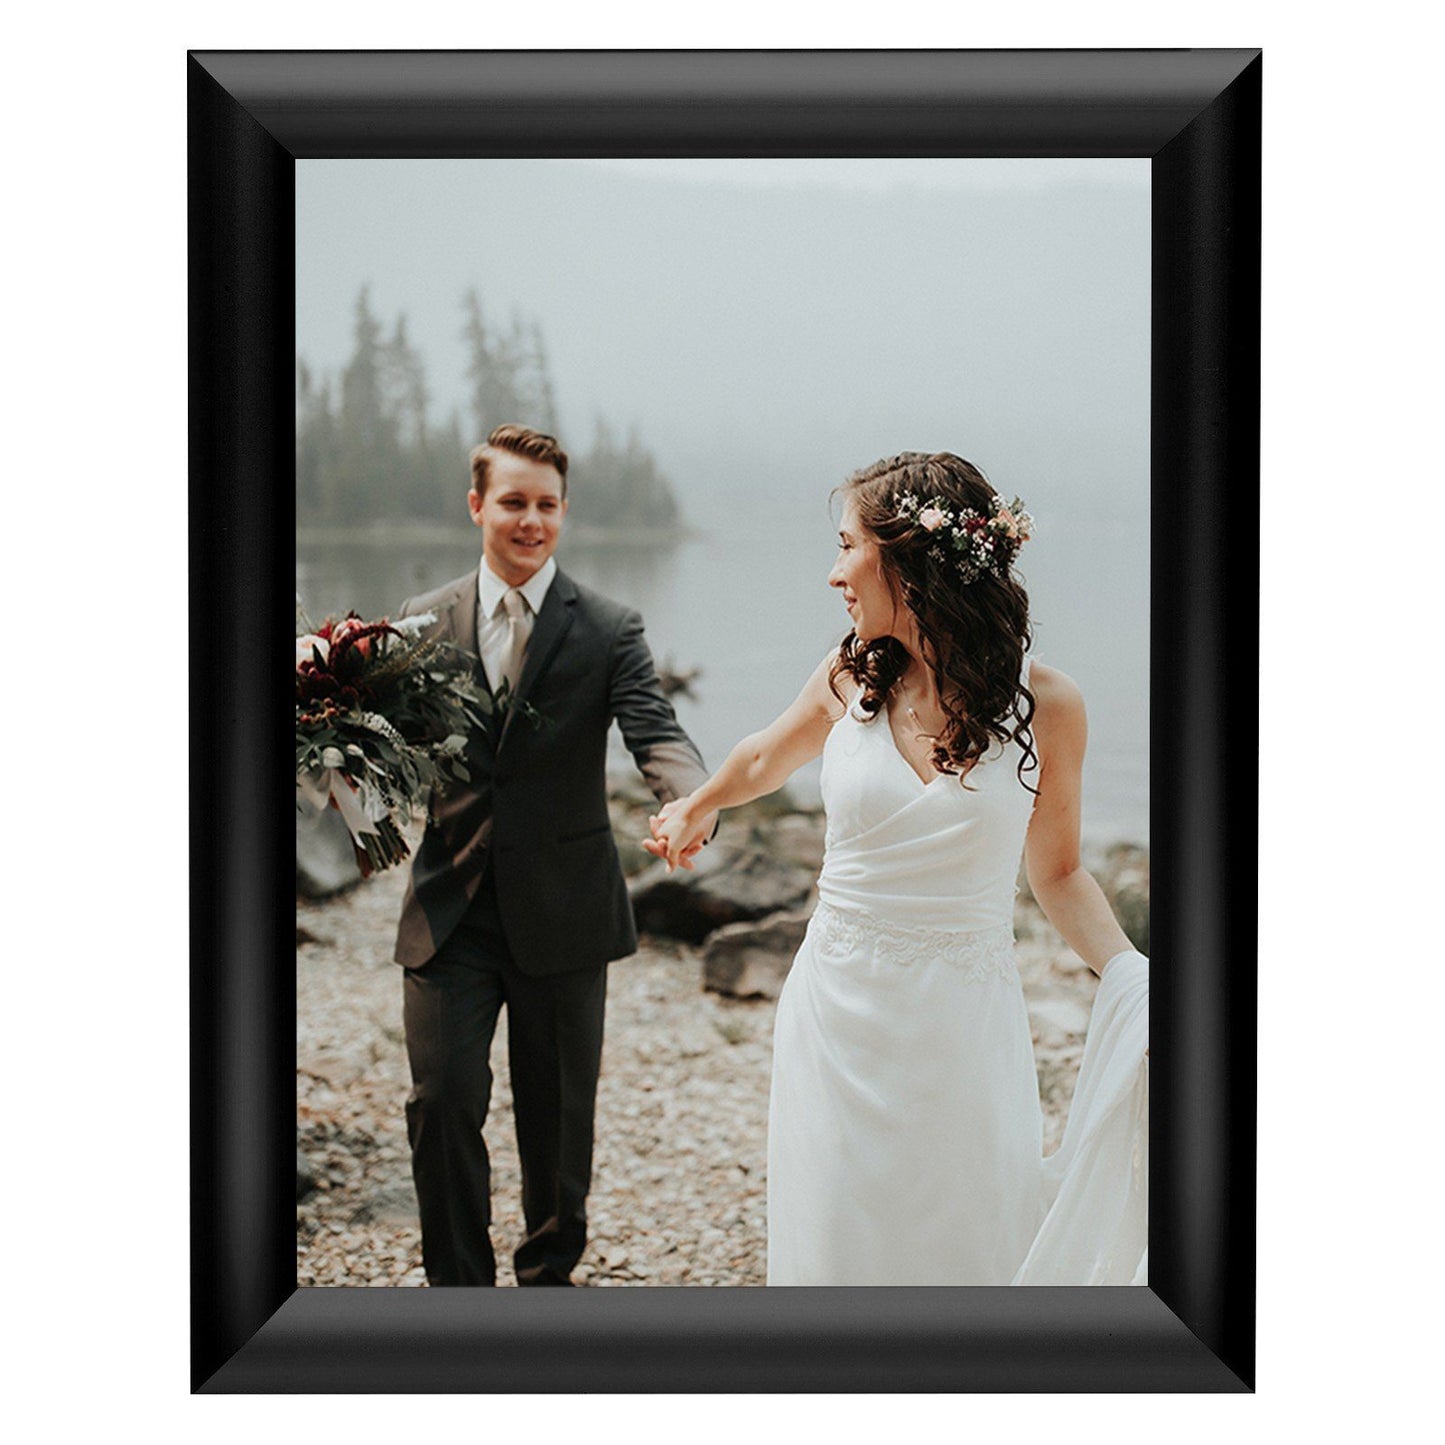 Load image into Gallery viewer, 8.5x11 Black SnapeZo Snap Frame - 1 Inch Profile
